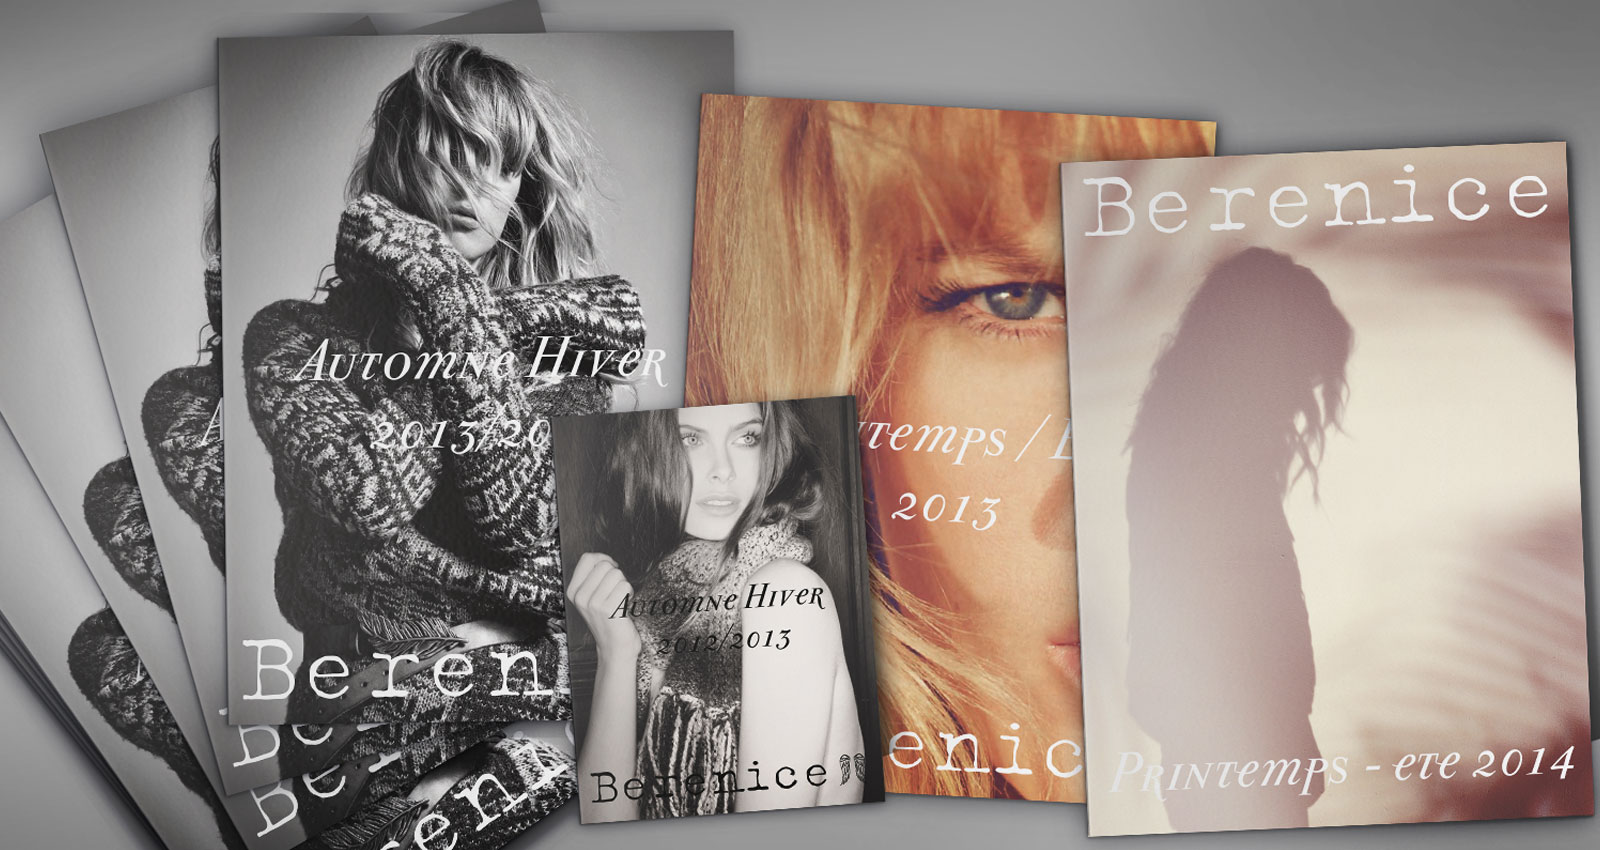 Catalogues for Bérénice fashion brand